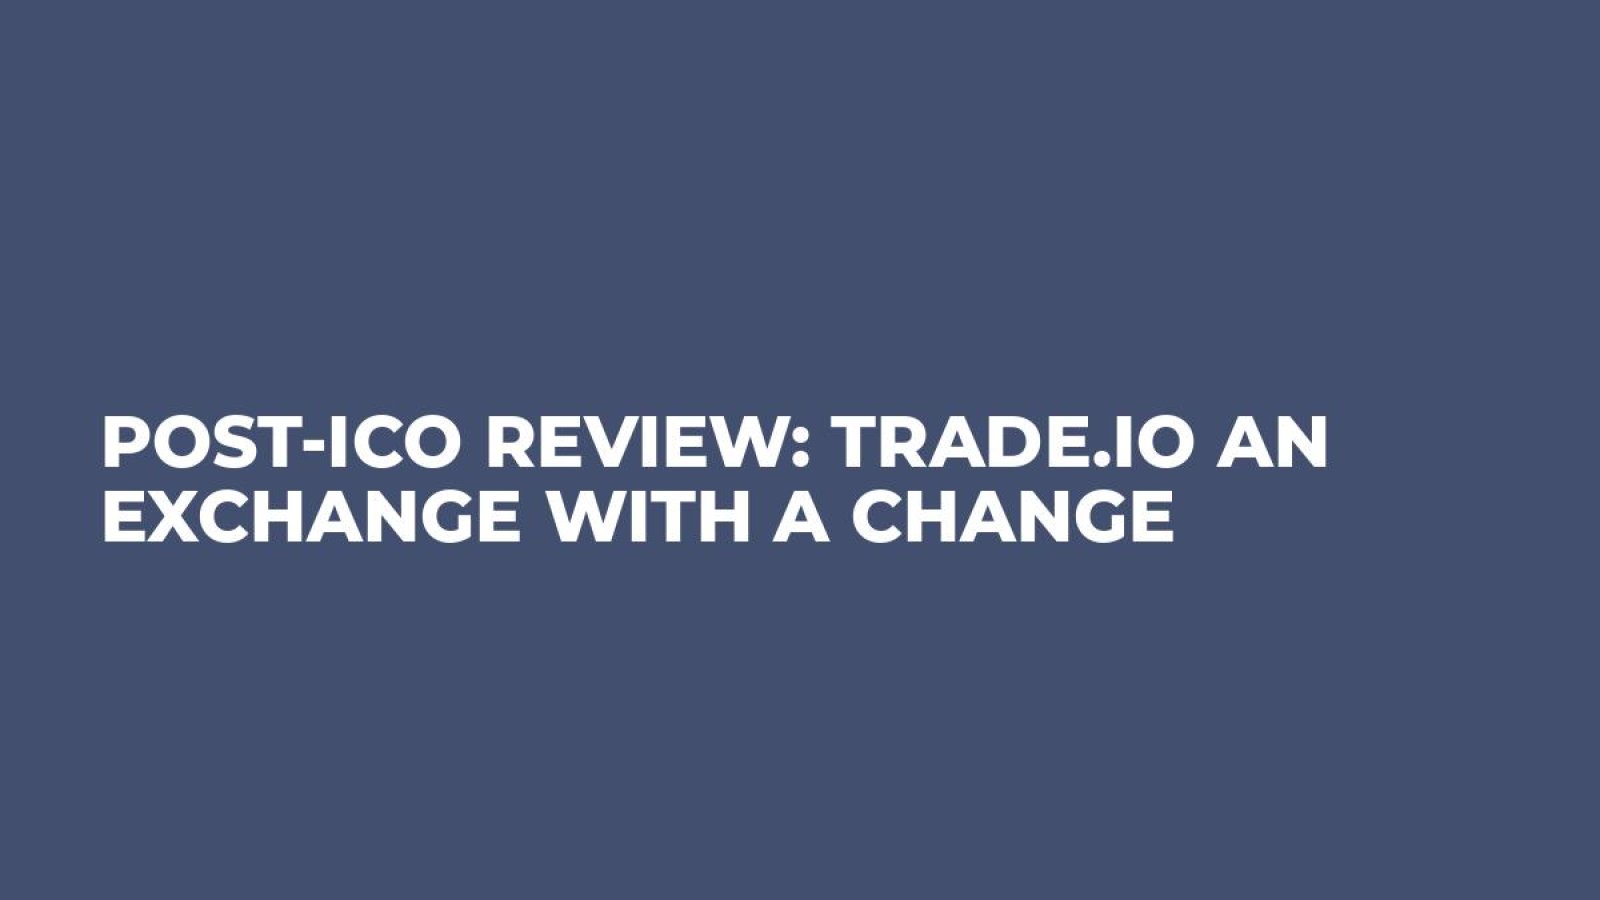 Post-ICO Review: Trade.io an Exchange With a Change